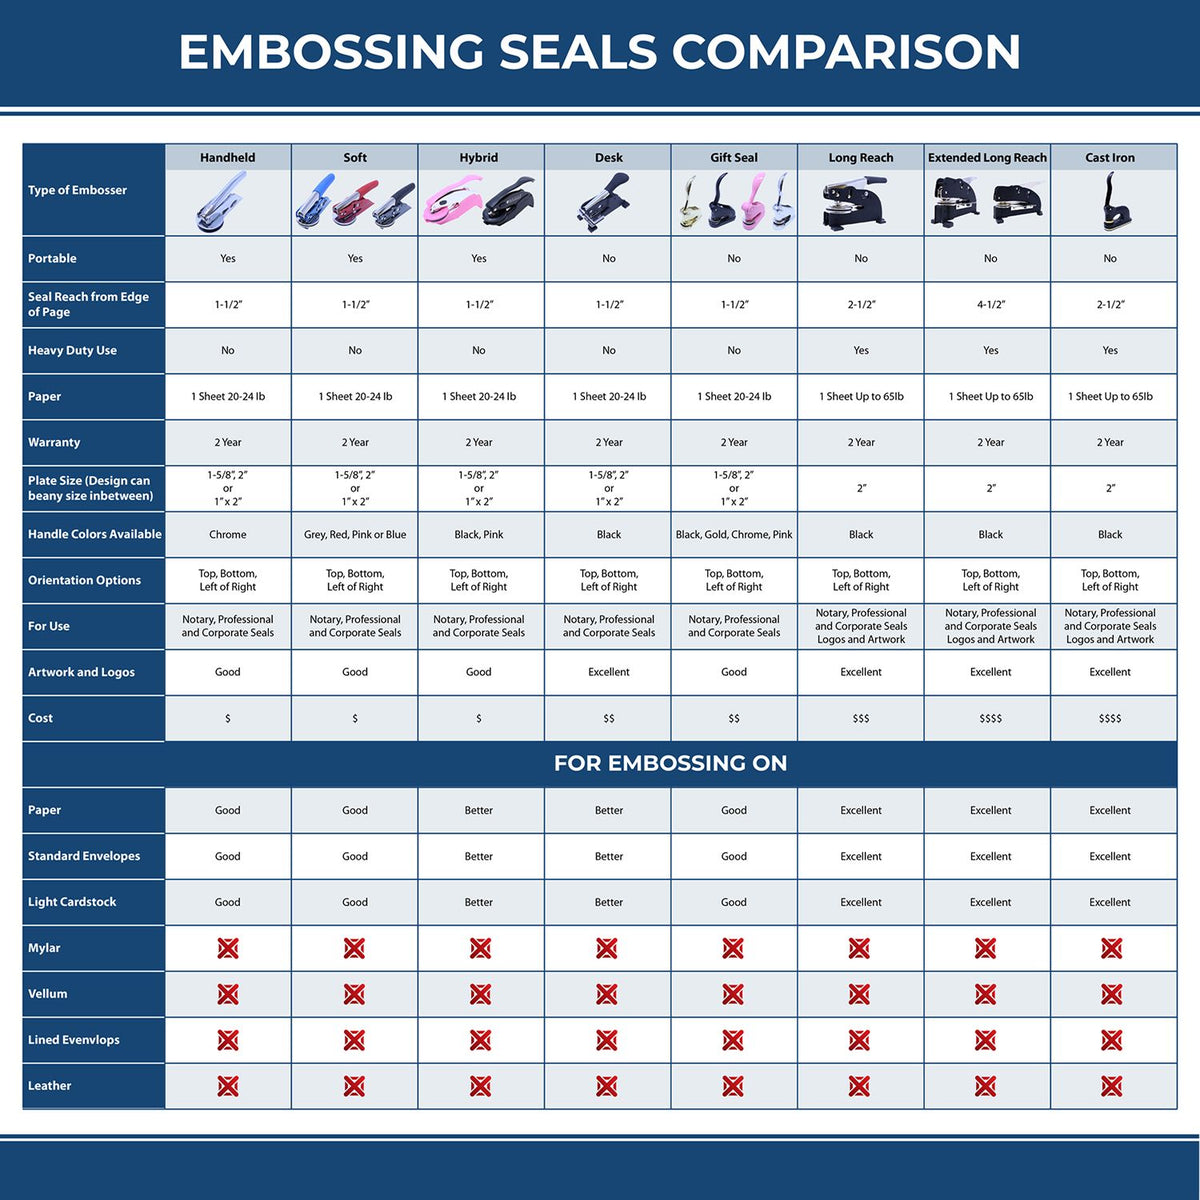 A comparison chart for the different types of mount models available for the Handheld Delaware Professional Engineer Embosser.